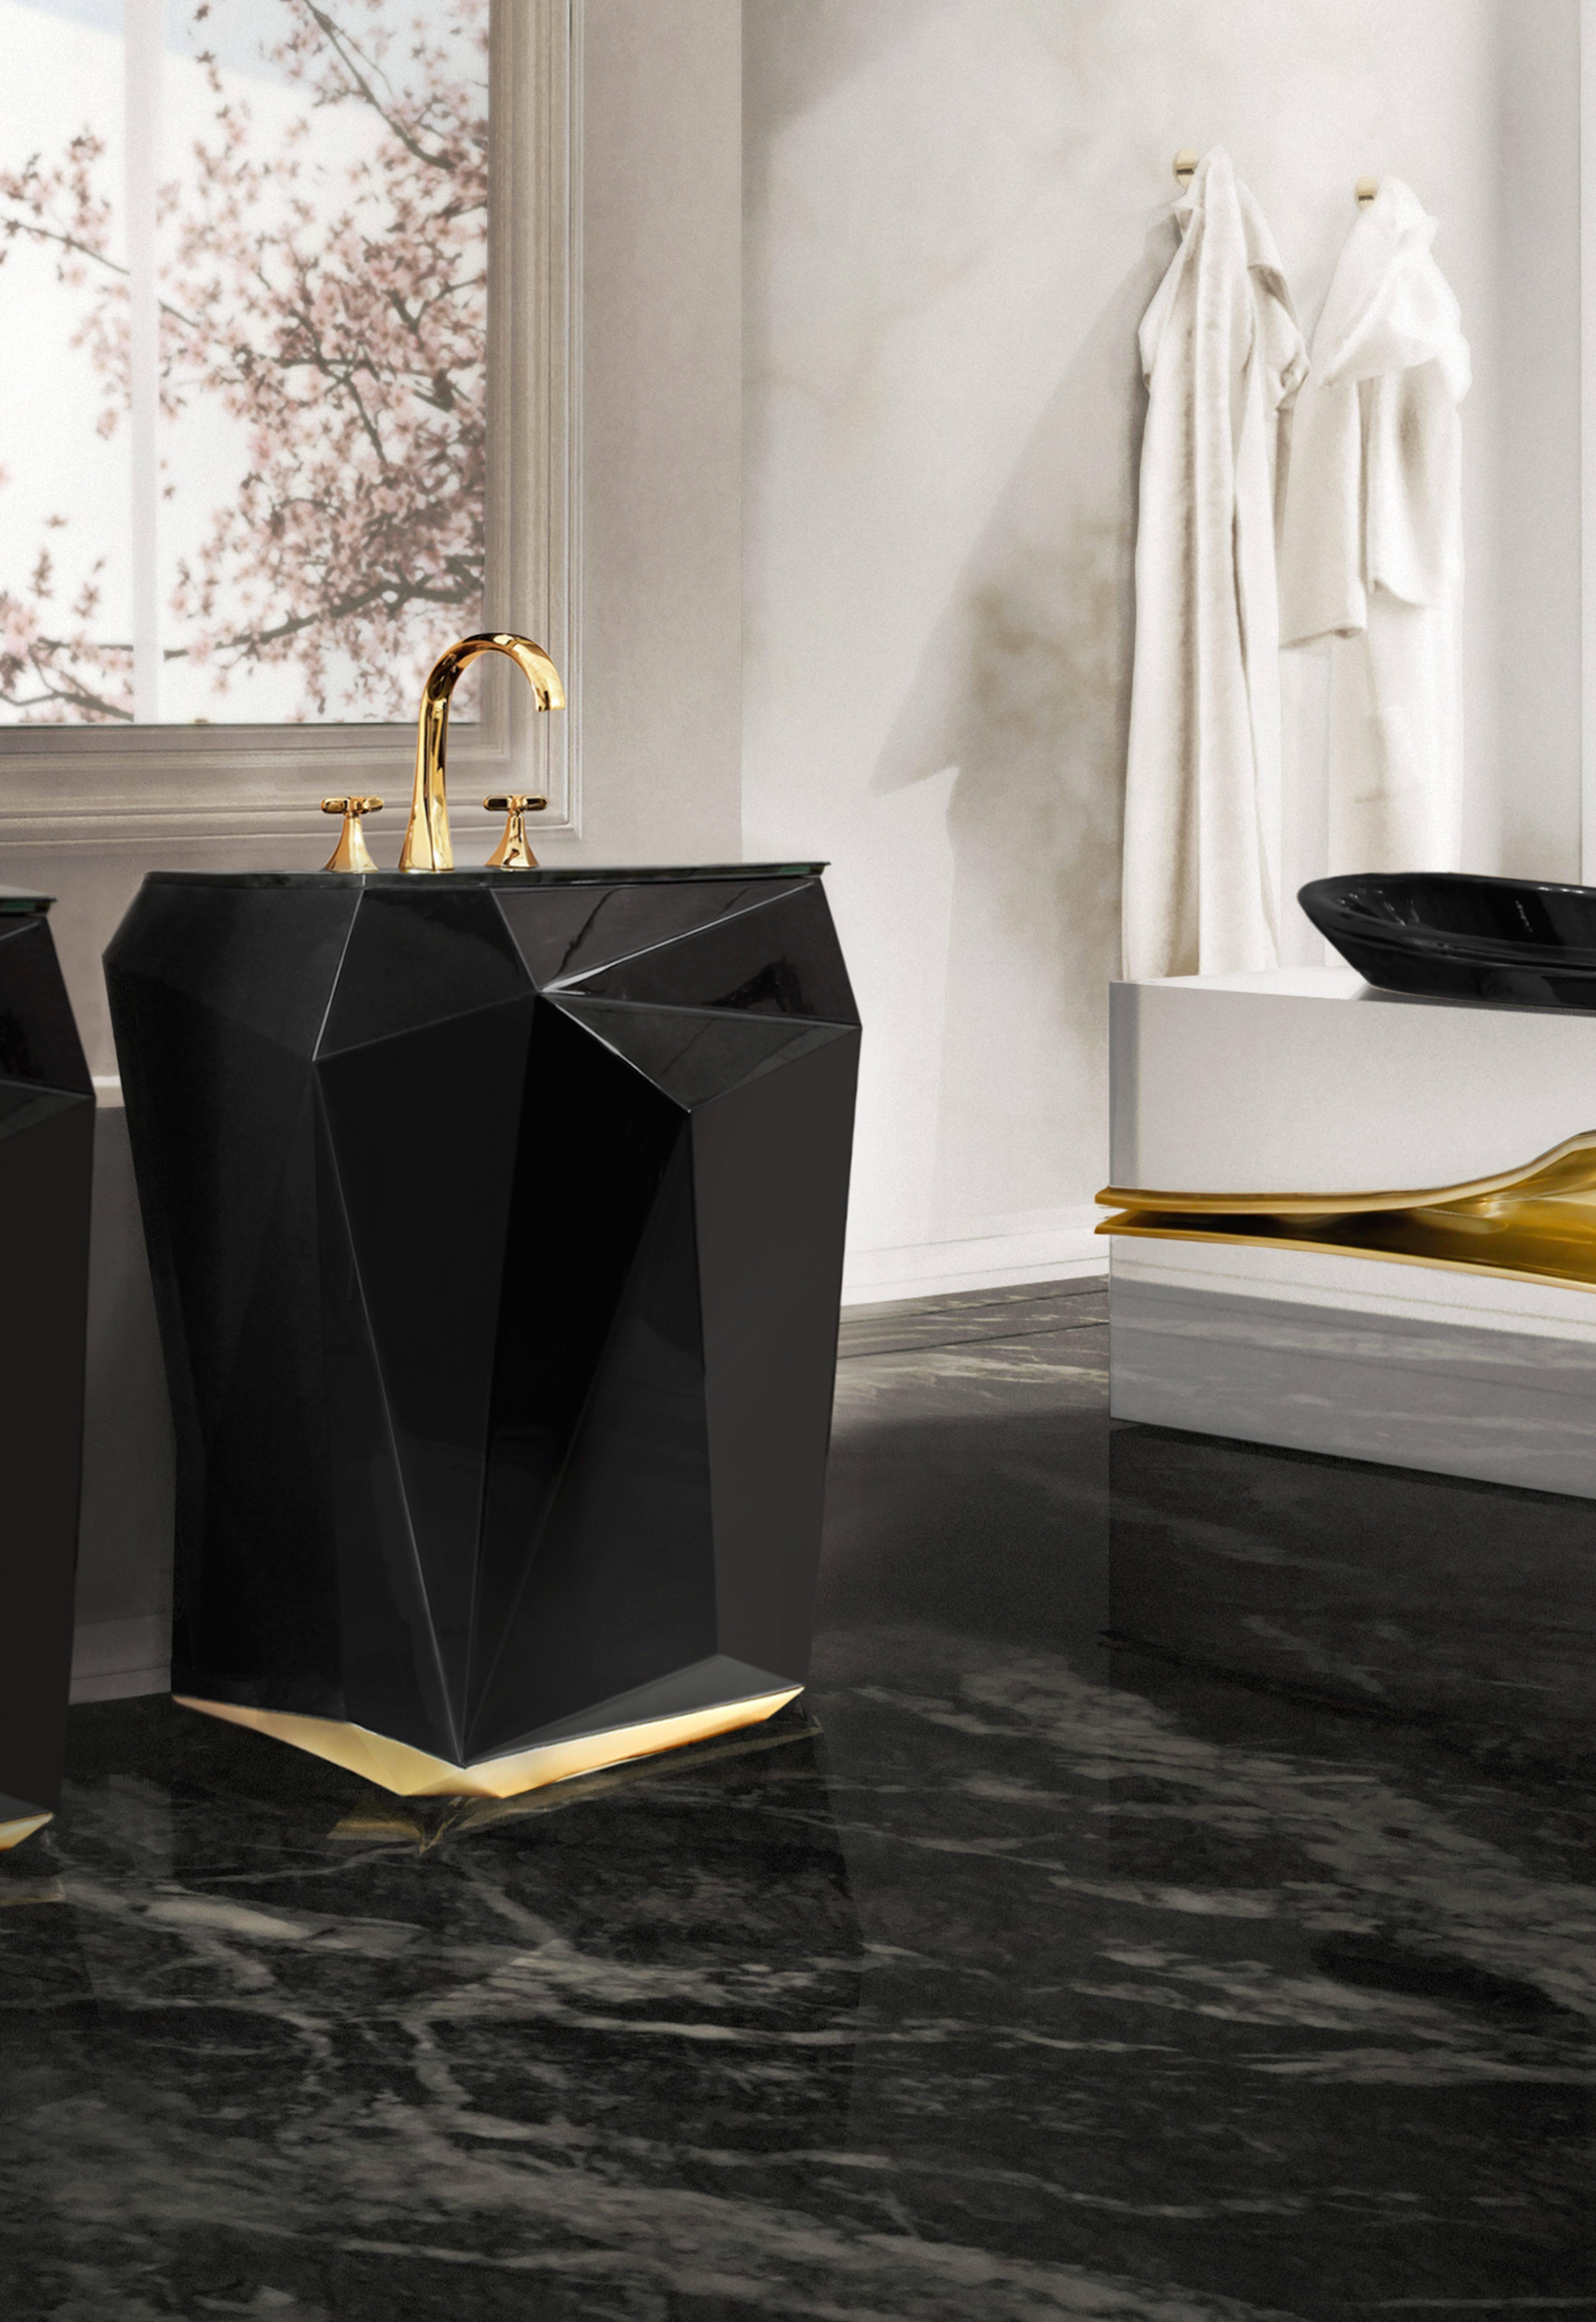 Lacquered European Modern Black Varnished Lacquer and Gold Freestanding Wash Basin Sink For Sale